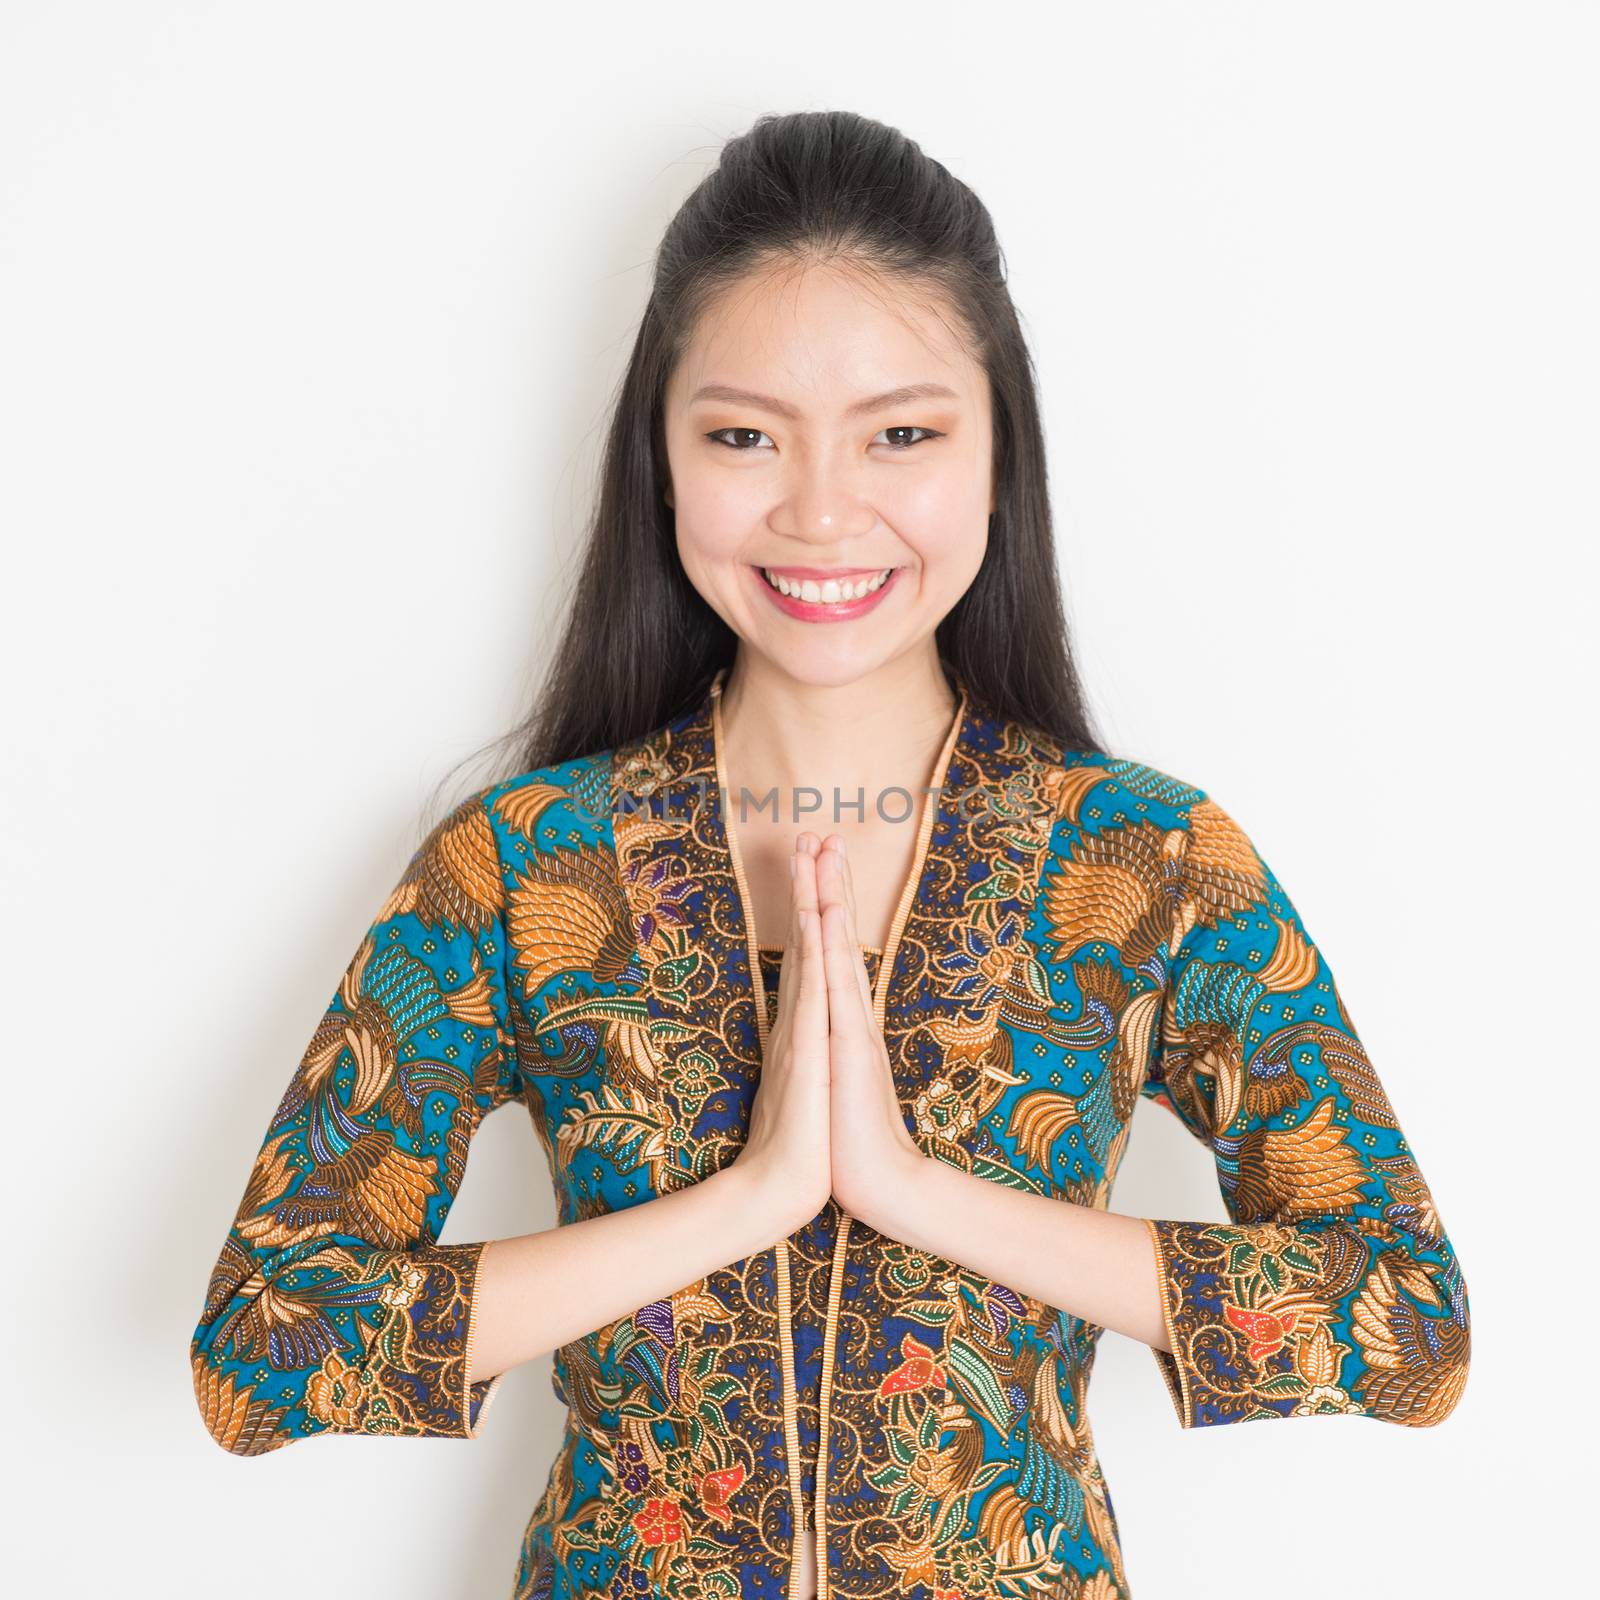 Portrait of happy Southeast Asian woman with batik dress in greeting gesture on plain background.